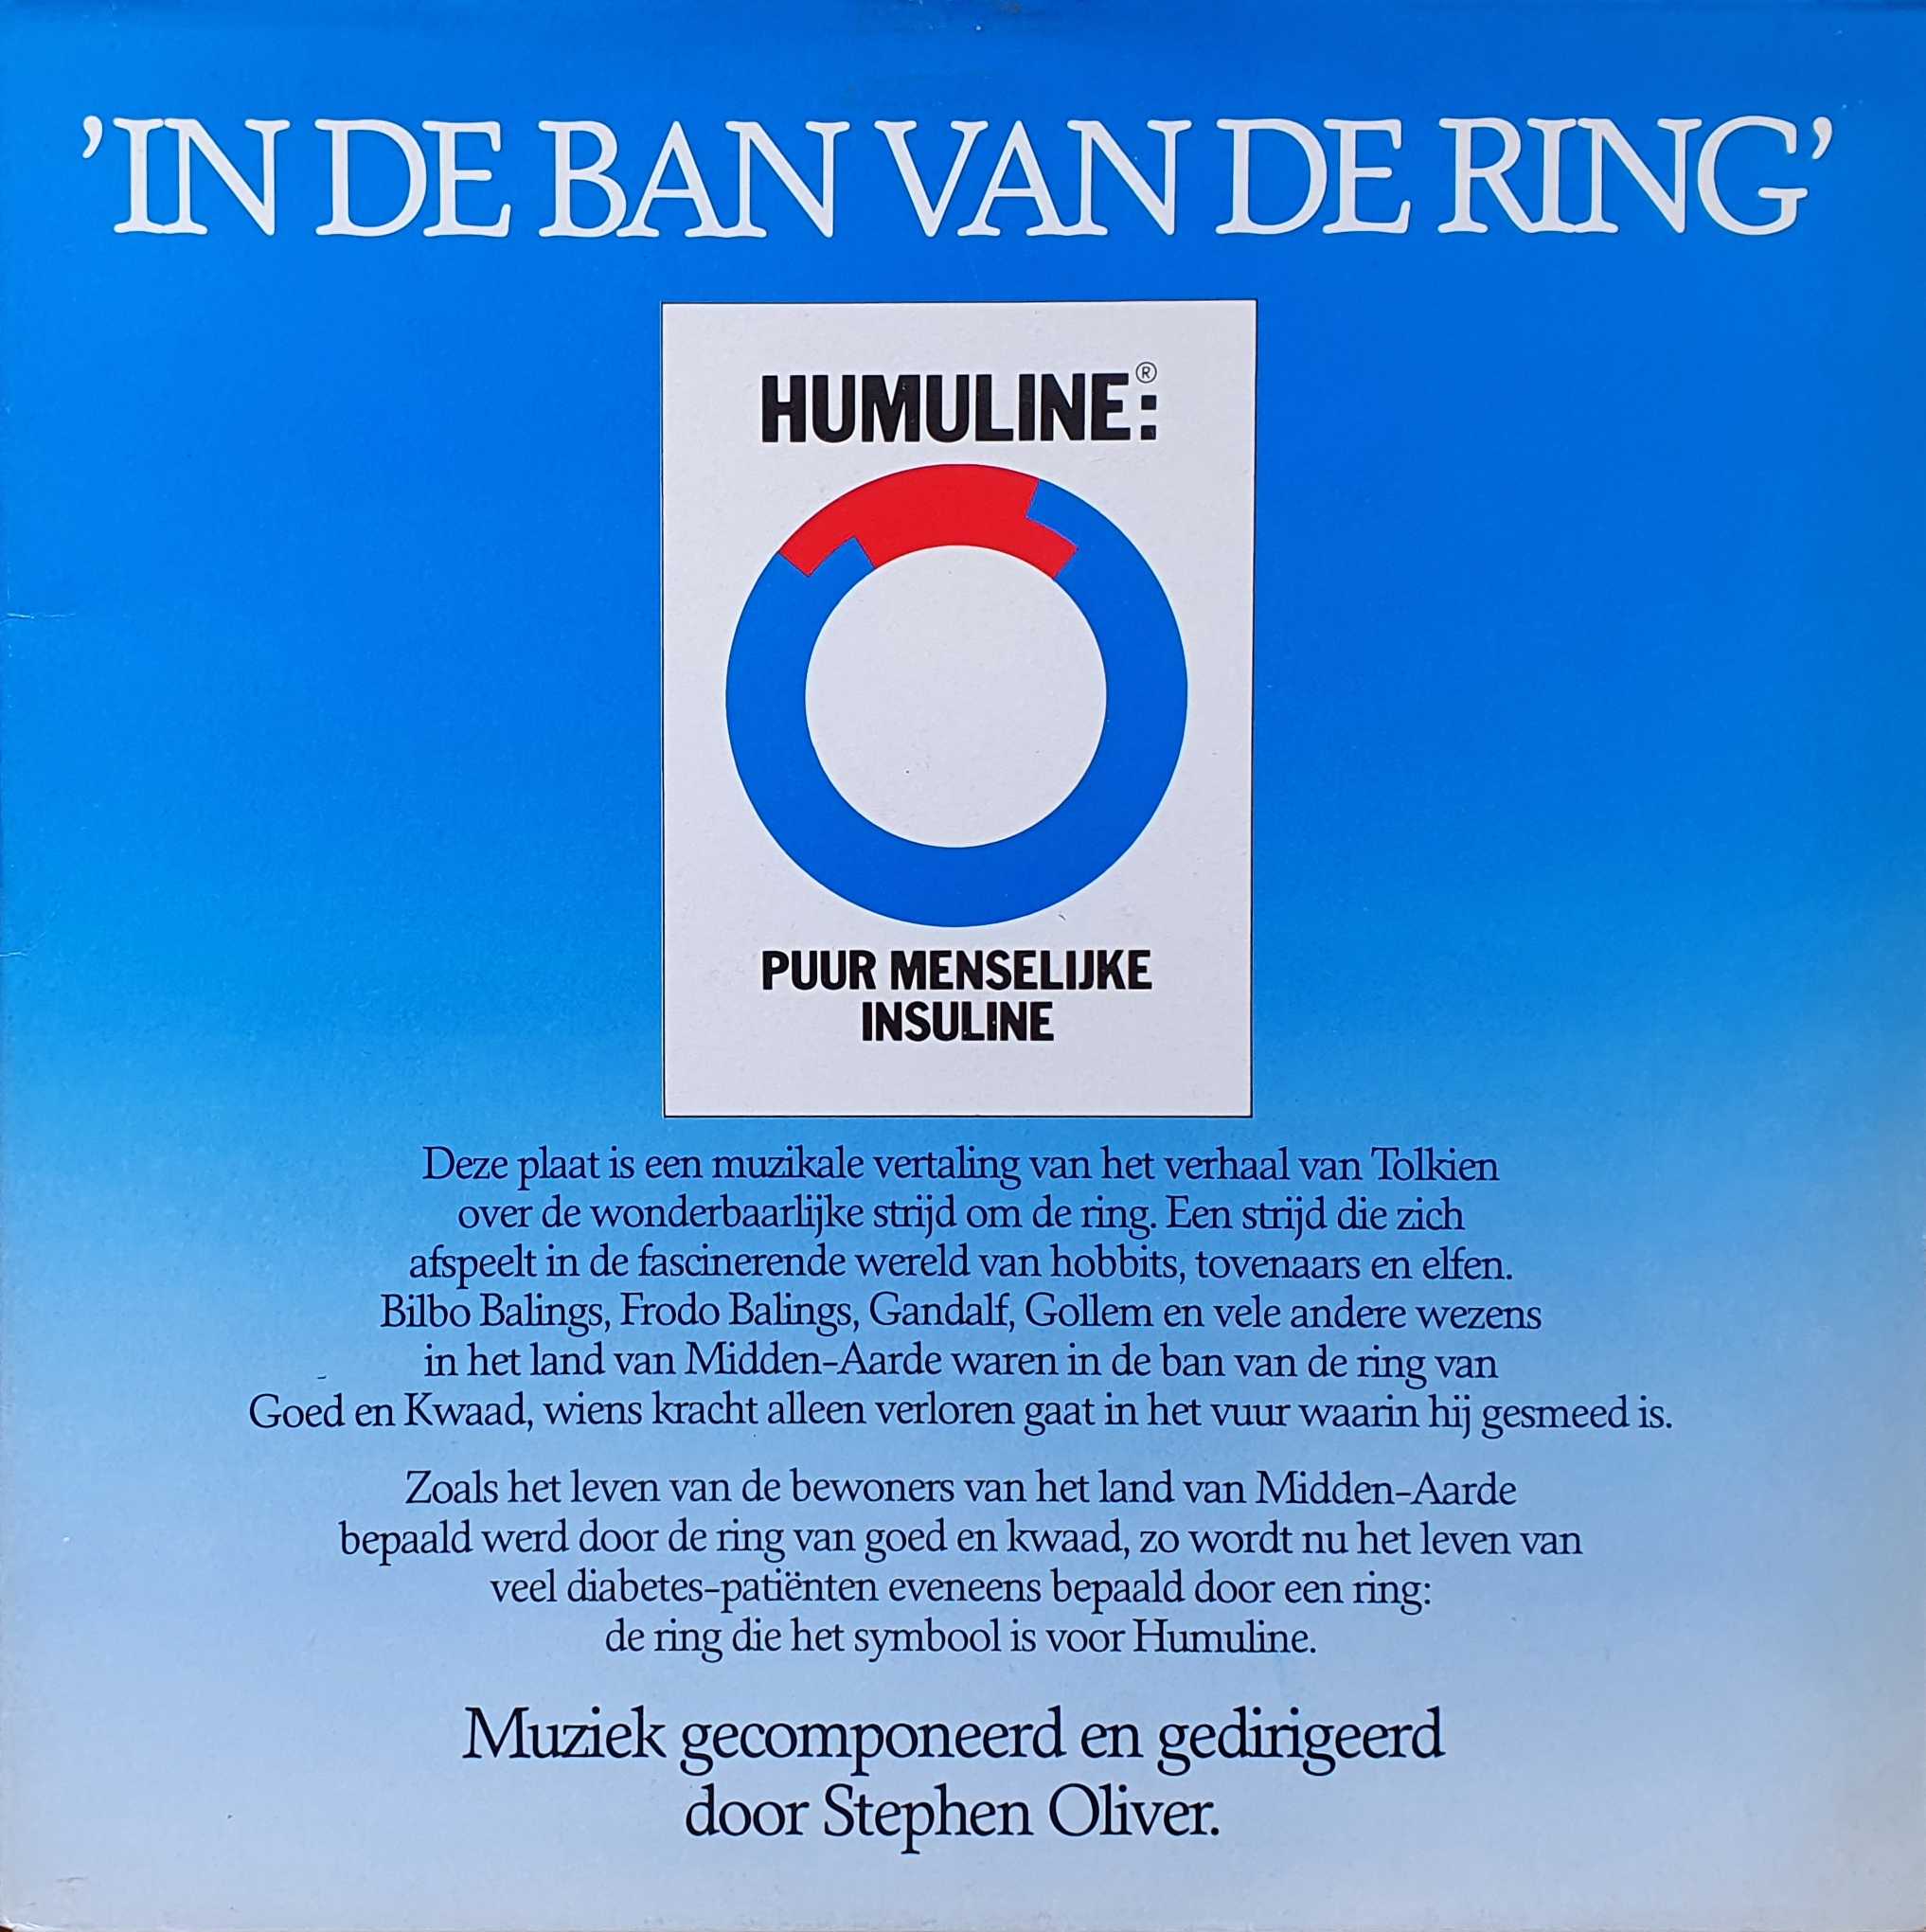 Picture of REH 415-iD In de ban van de ring by artist Various from the BBC albums - Records and Tapes library